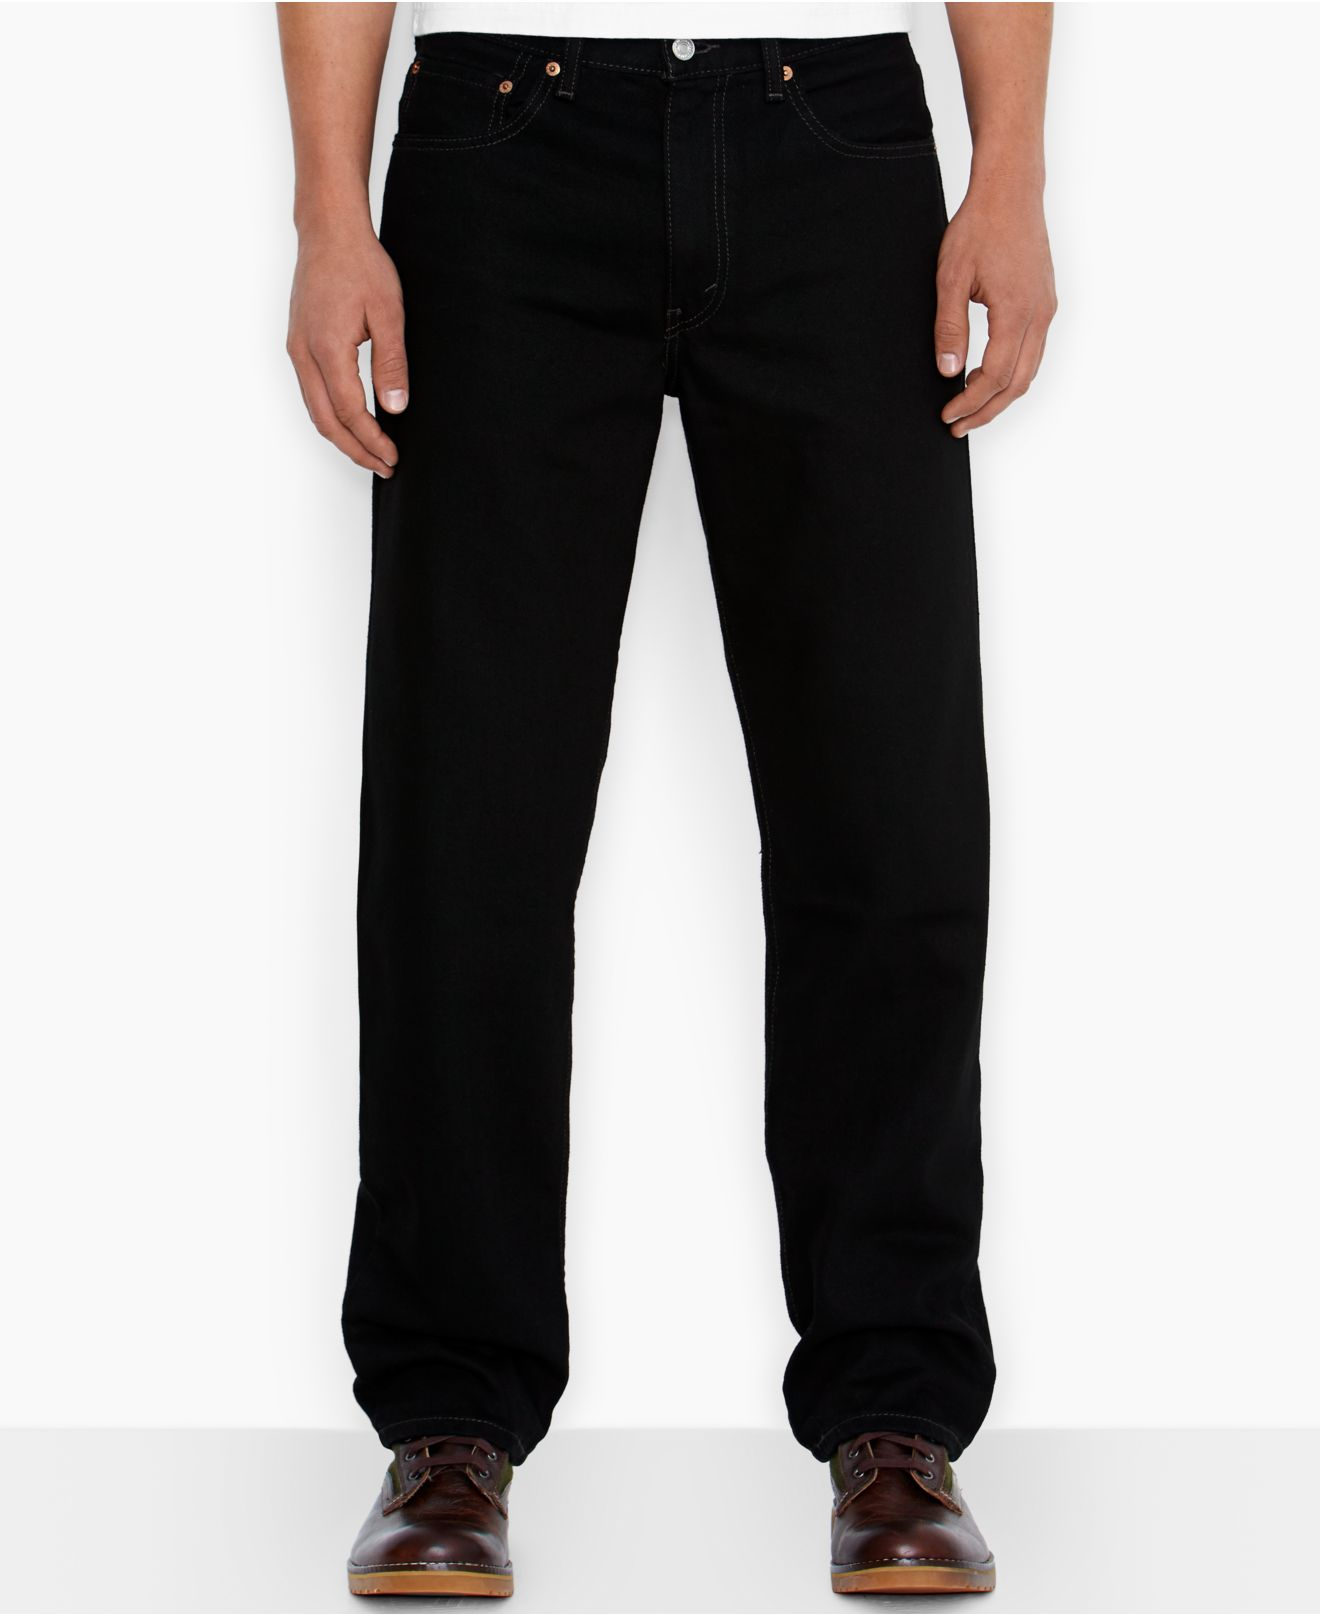 Levi's Men's 550 Relaxed-fit Jeans in Black Out